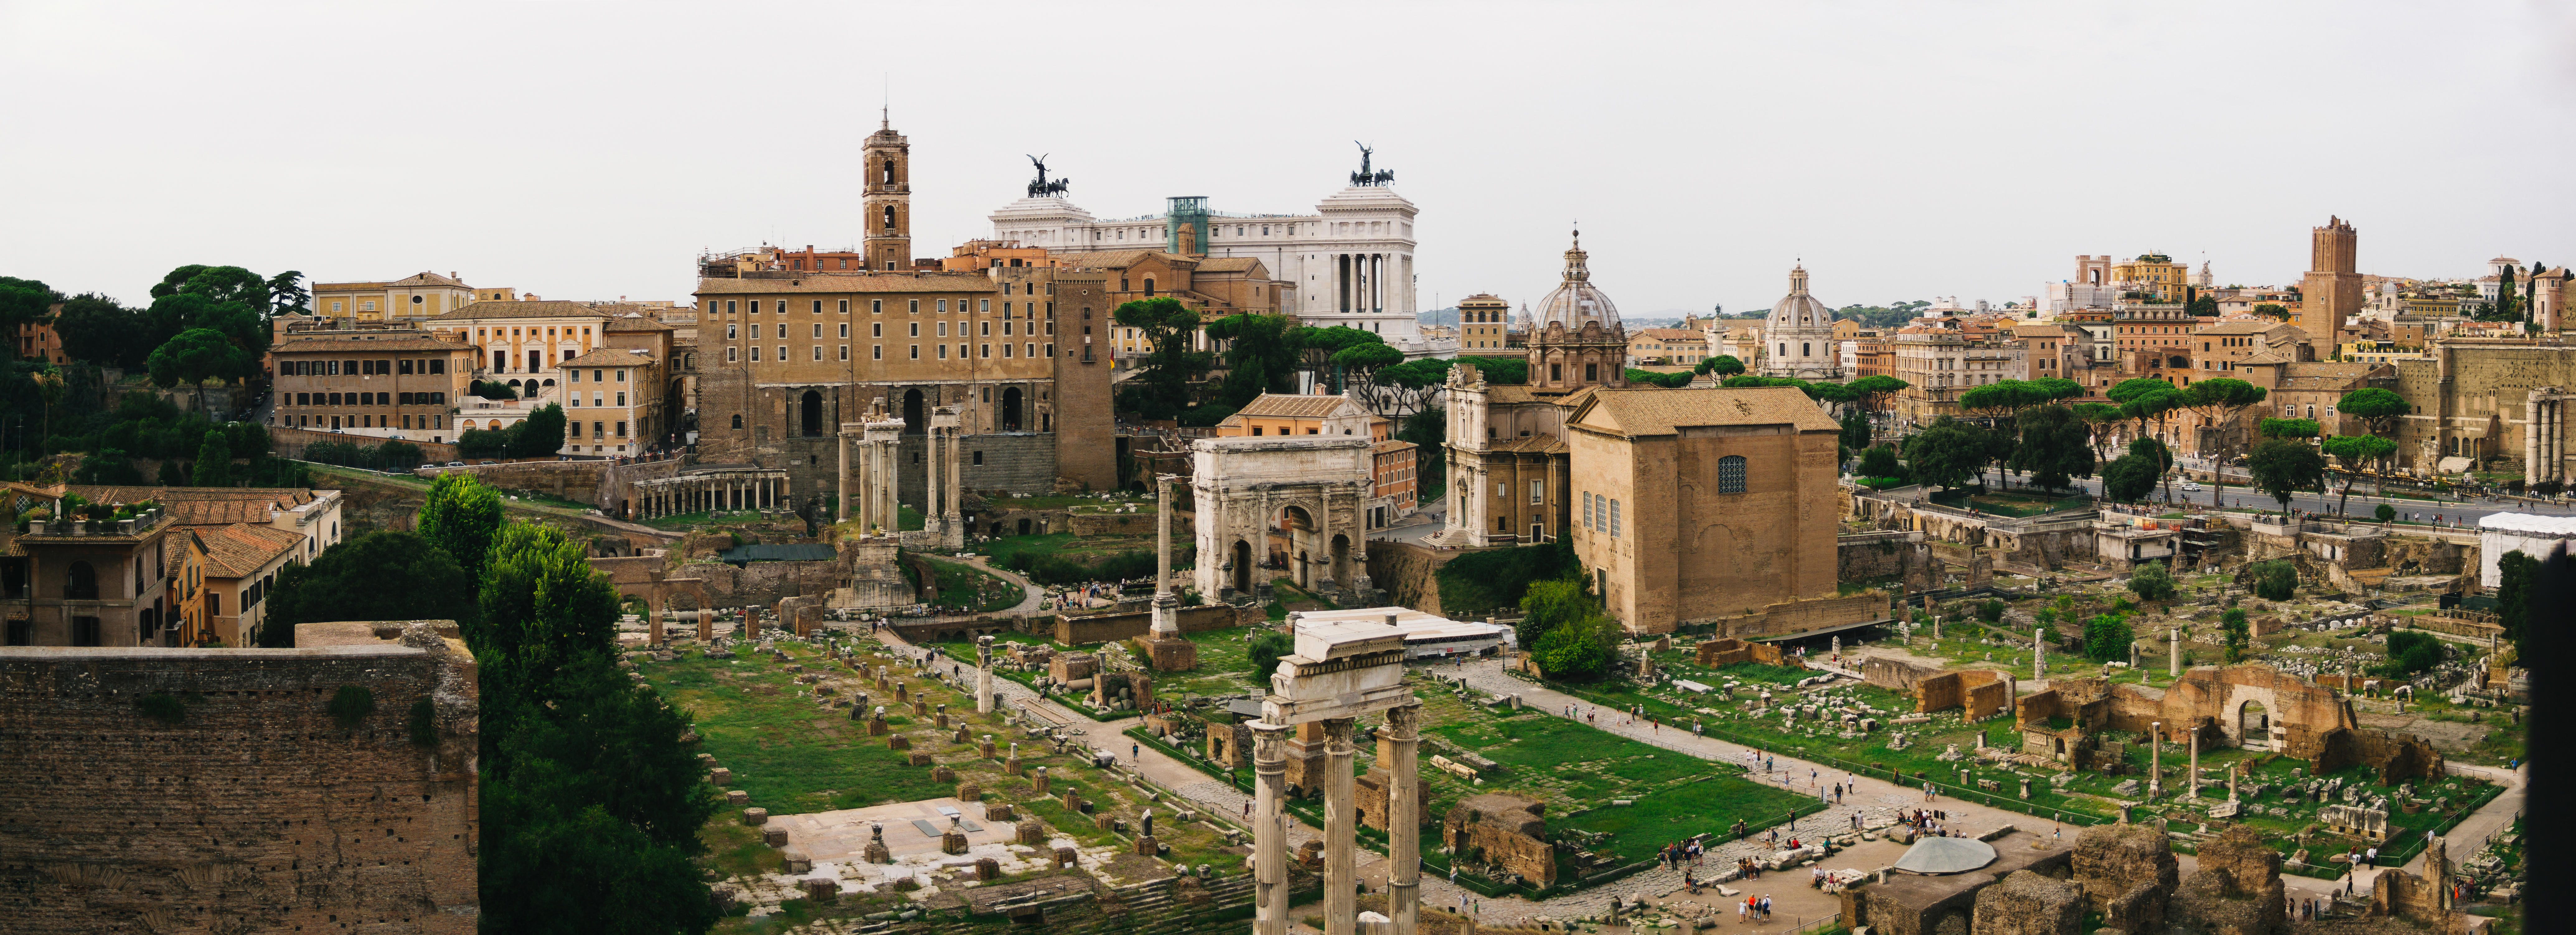 A photo showing the remains of the Forum Romanum today taken from the Palatine Hill facing towards the Capitoline.